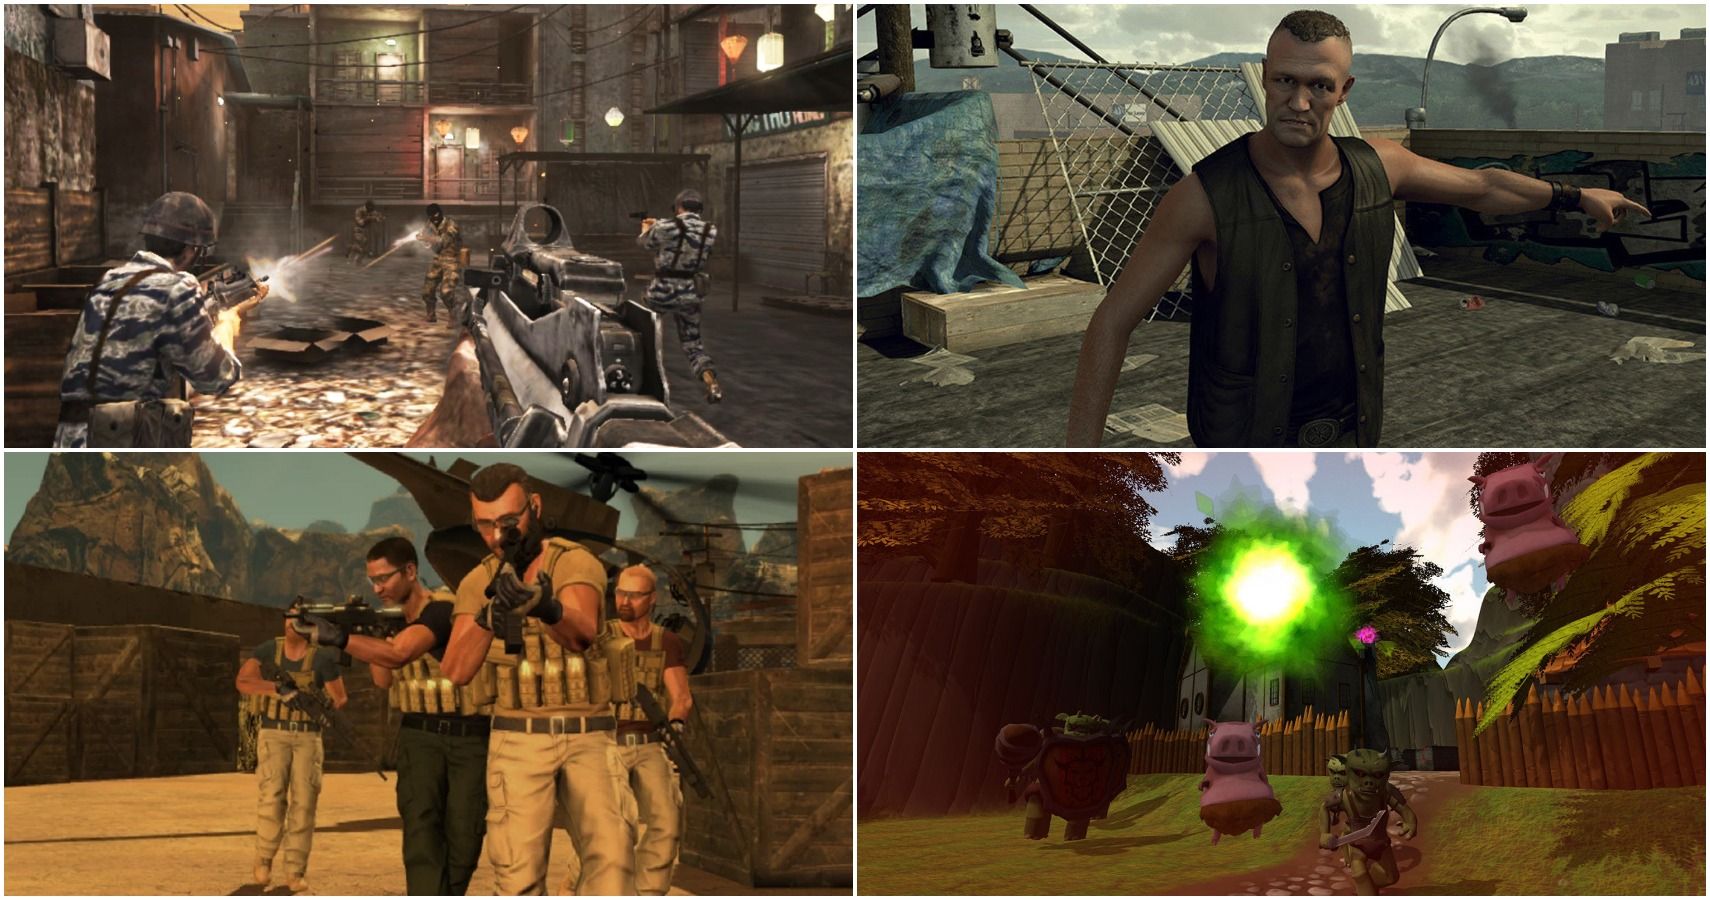 10 Worst Call Of Duty Games, According To Metacritic